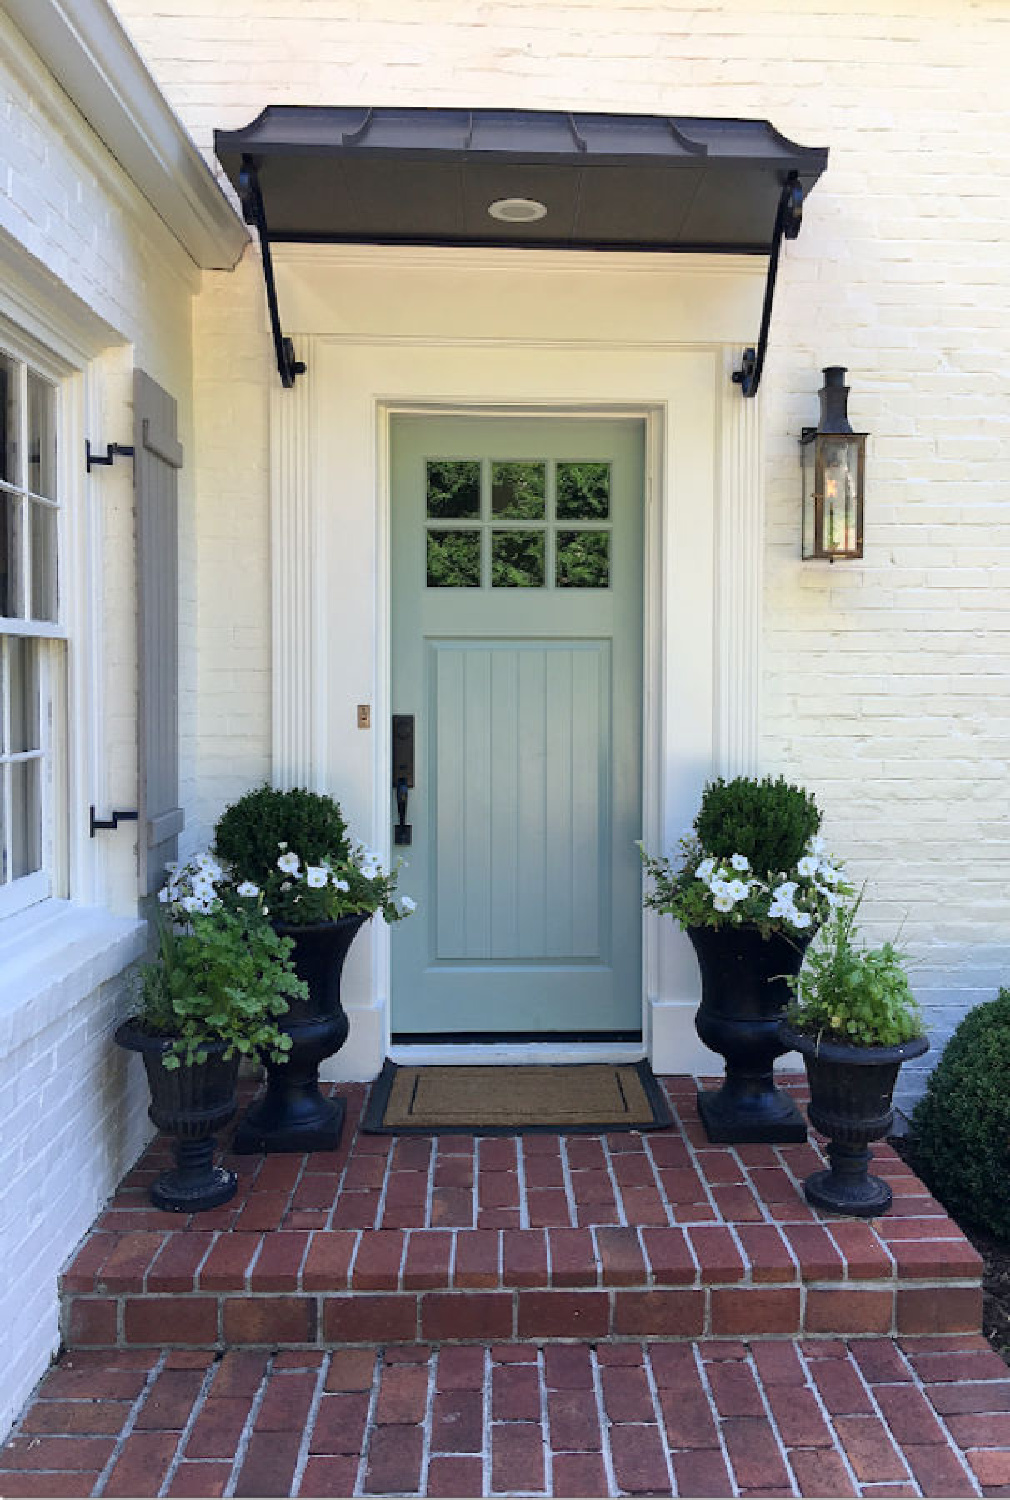 Wythe Blue (Benjamin Moore) on a front door of a beautiful white brick house (SW Alabaster) by Ladisic Fine Homes. #wytheblue #swalabaster